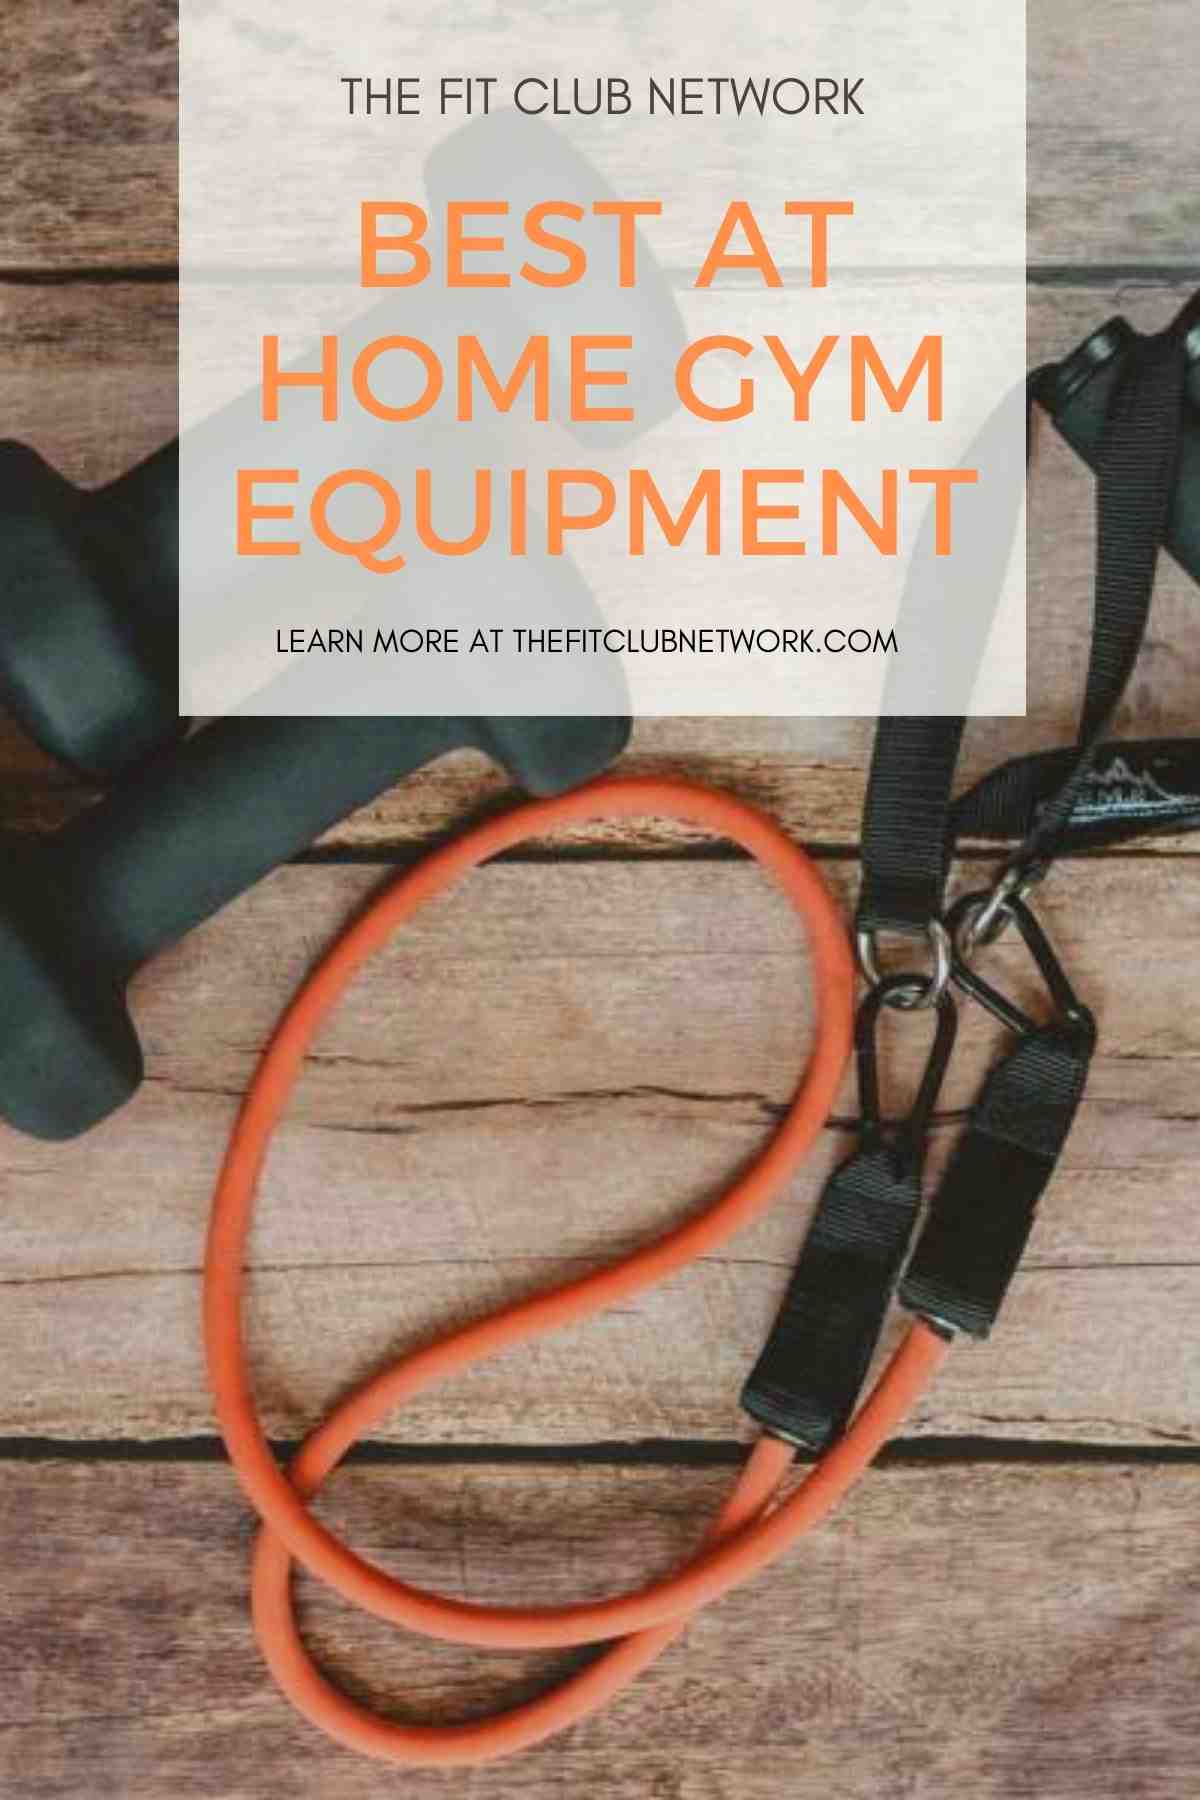 The Best At Home Gym Equipment